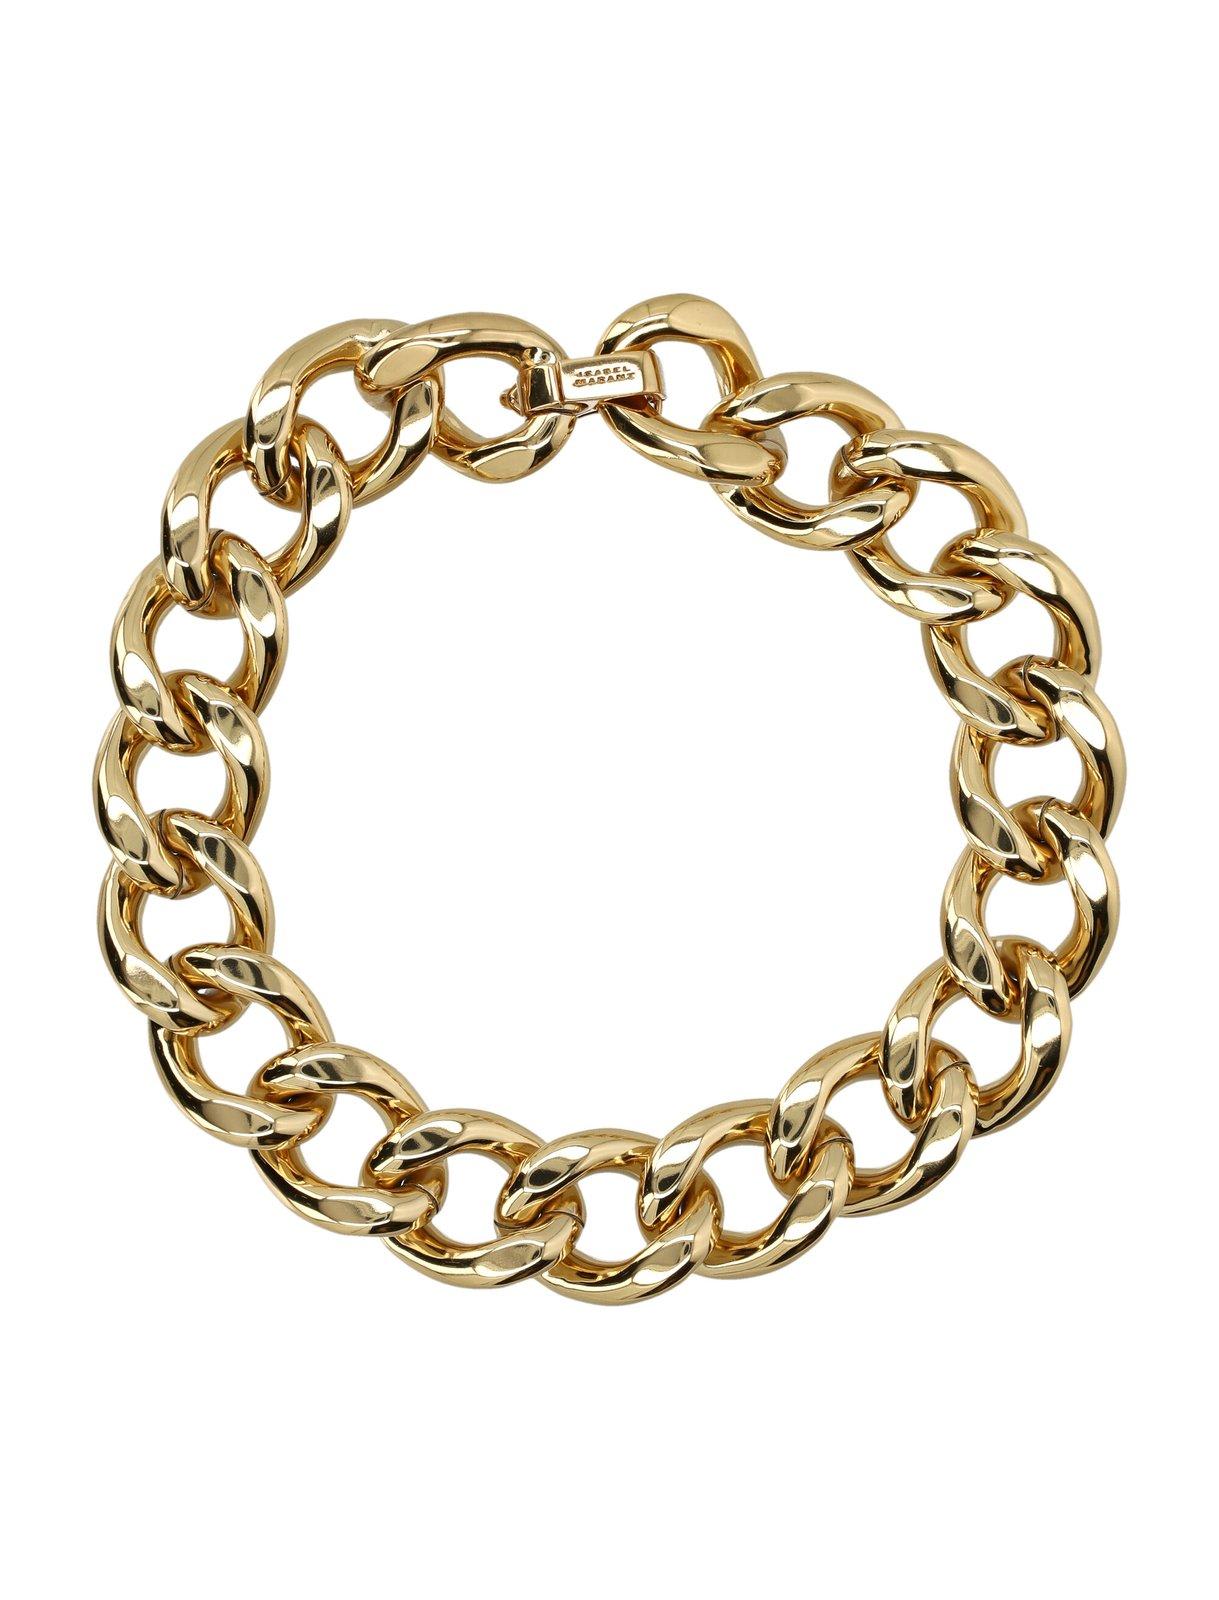 ISABEL MARANT BOLD CHAINED NECKLACE